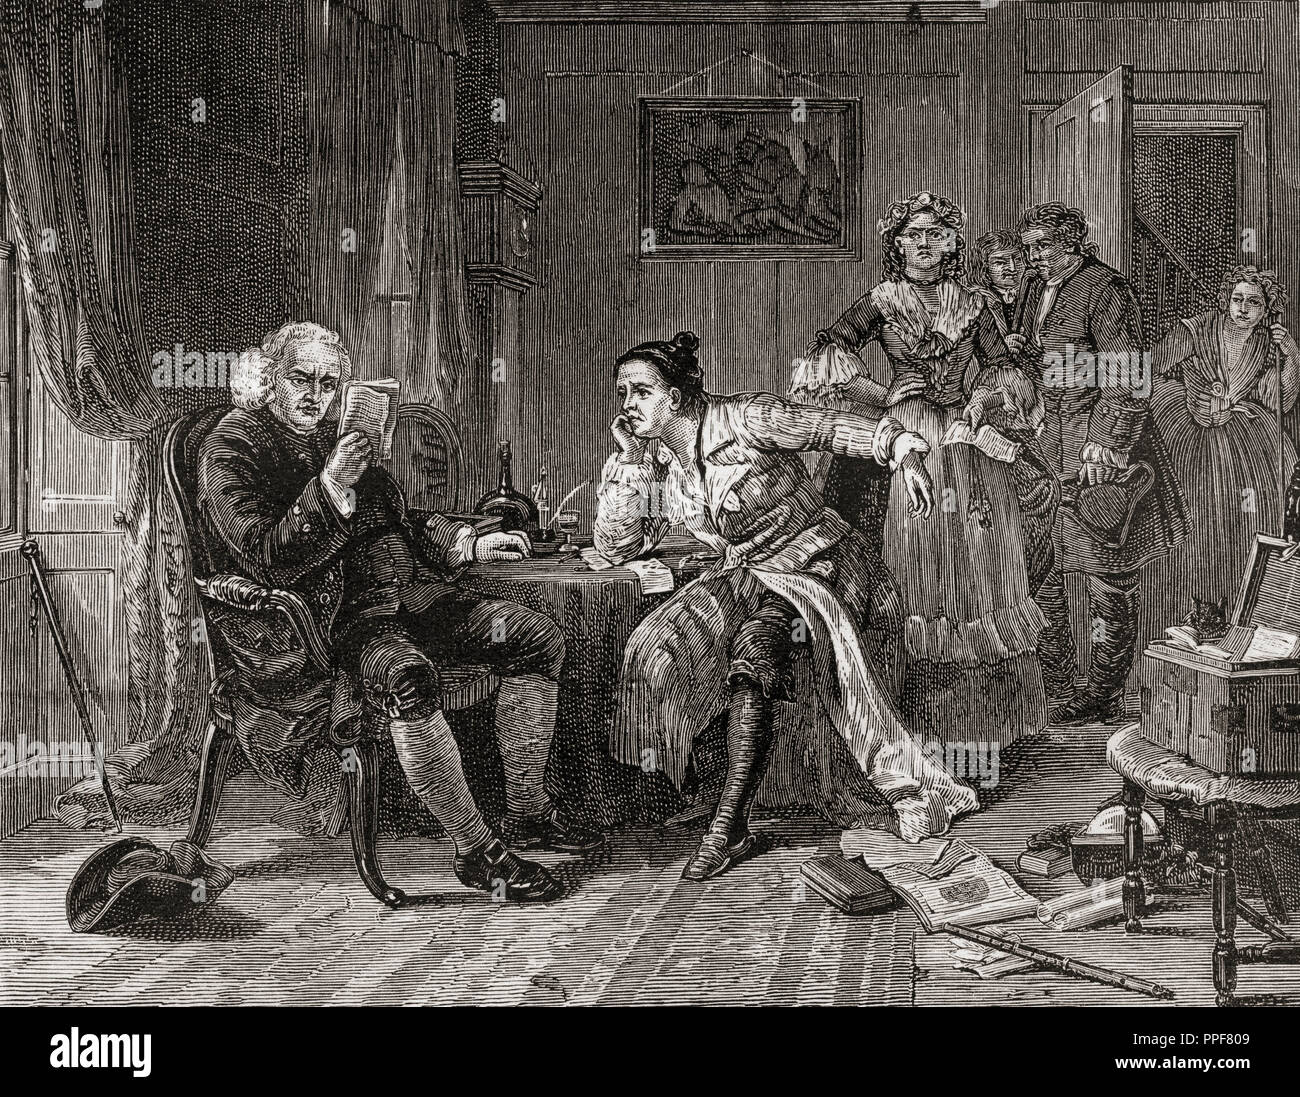 Dr. Johnson reading the manuscript of The Vicar of Wakefield.  Samuel Johnson, 1709 - 1784, aka Dr. Johnson.  English writer, poet, essayist, moralist, literary critic, biographer, editor and lexicographer.  From London Pictures, published 1890. Stock Photo